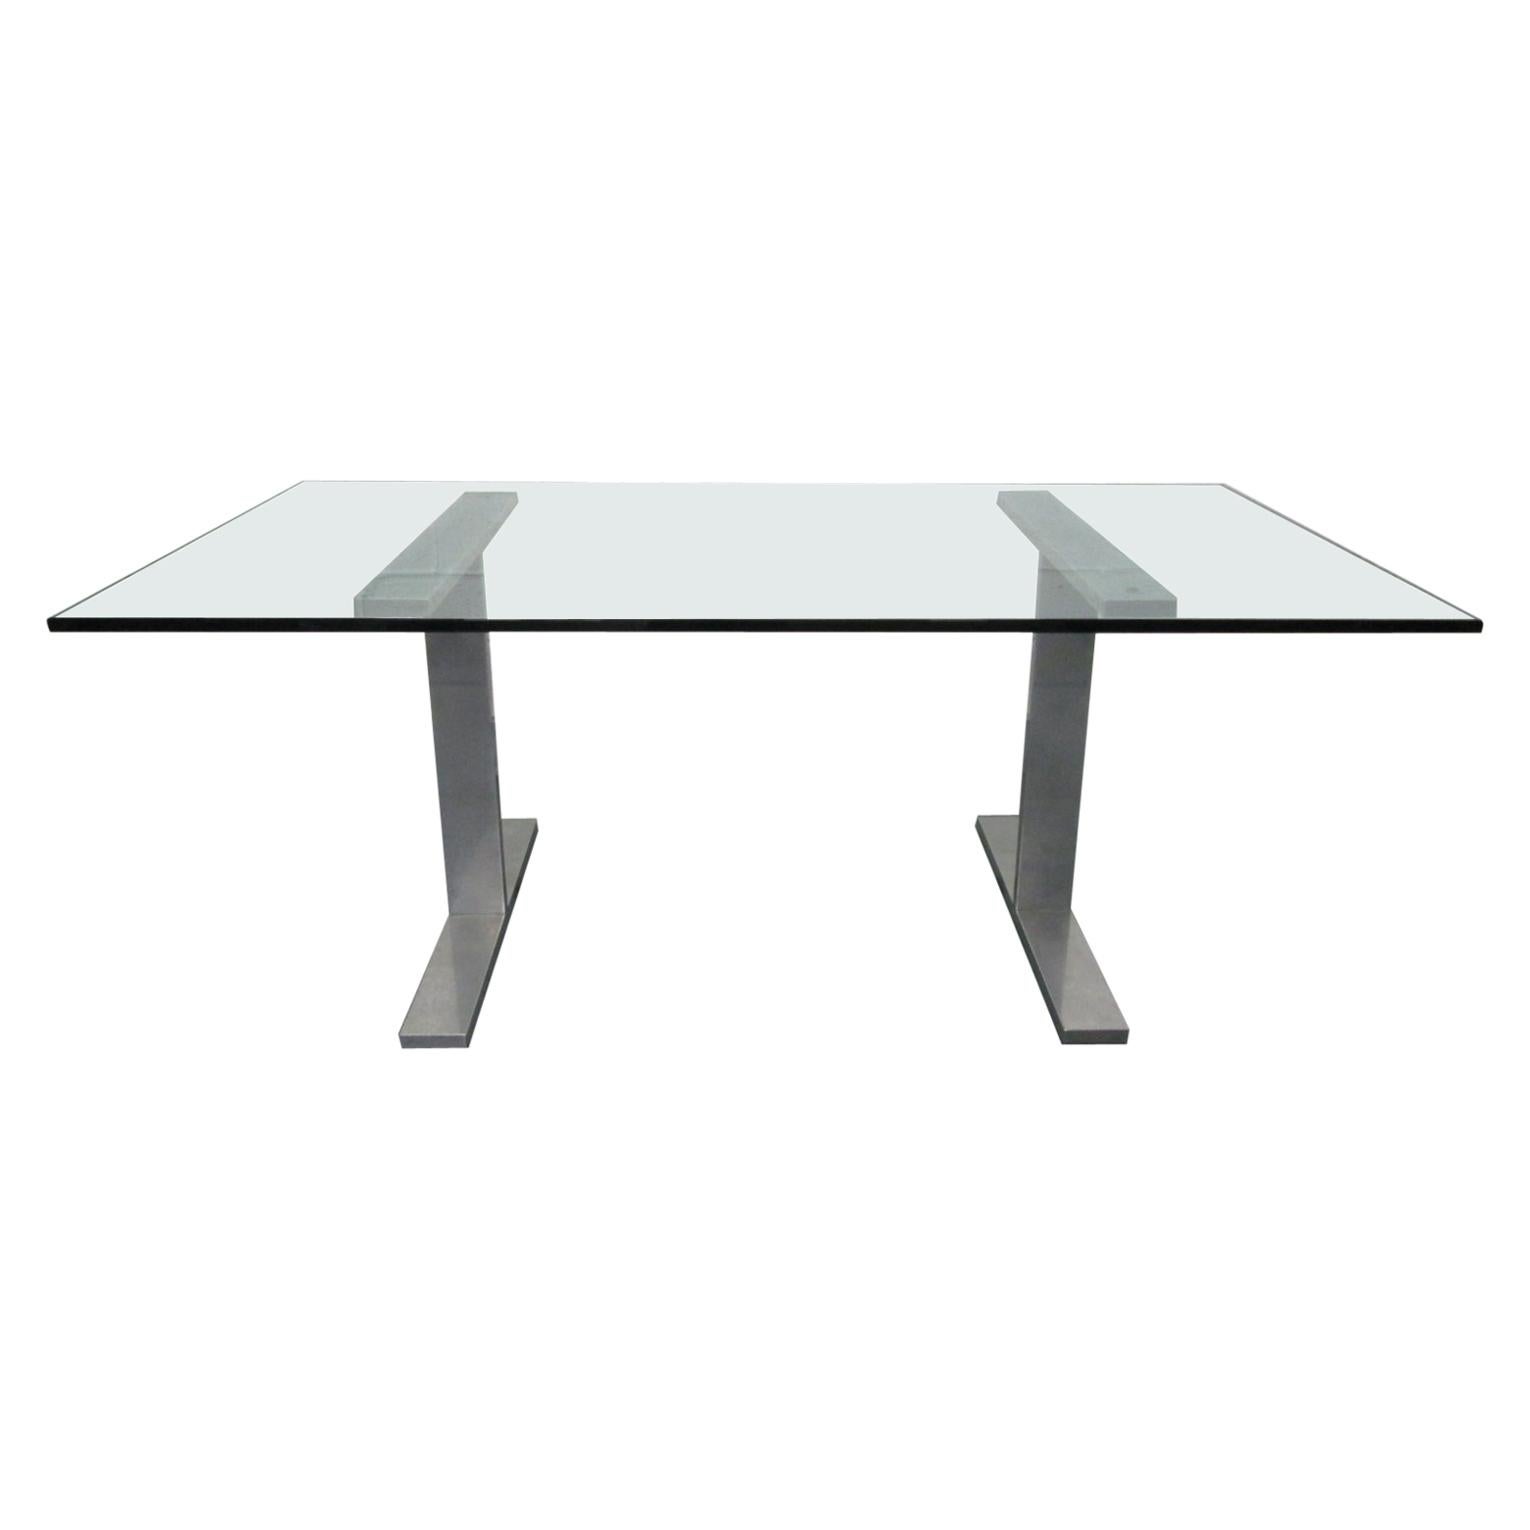 Steel Base and Glass Top Table or Desk